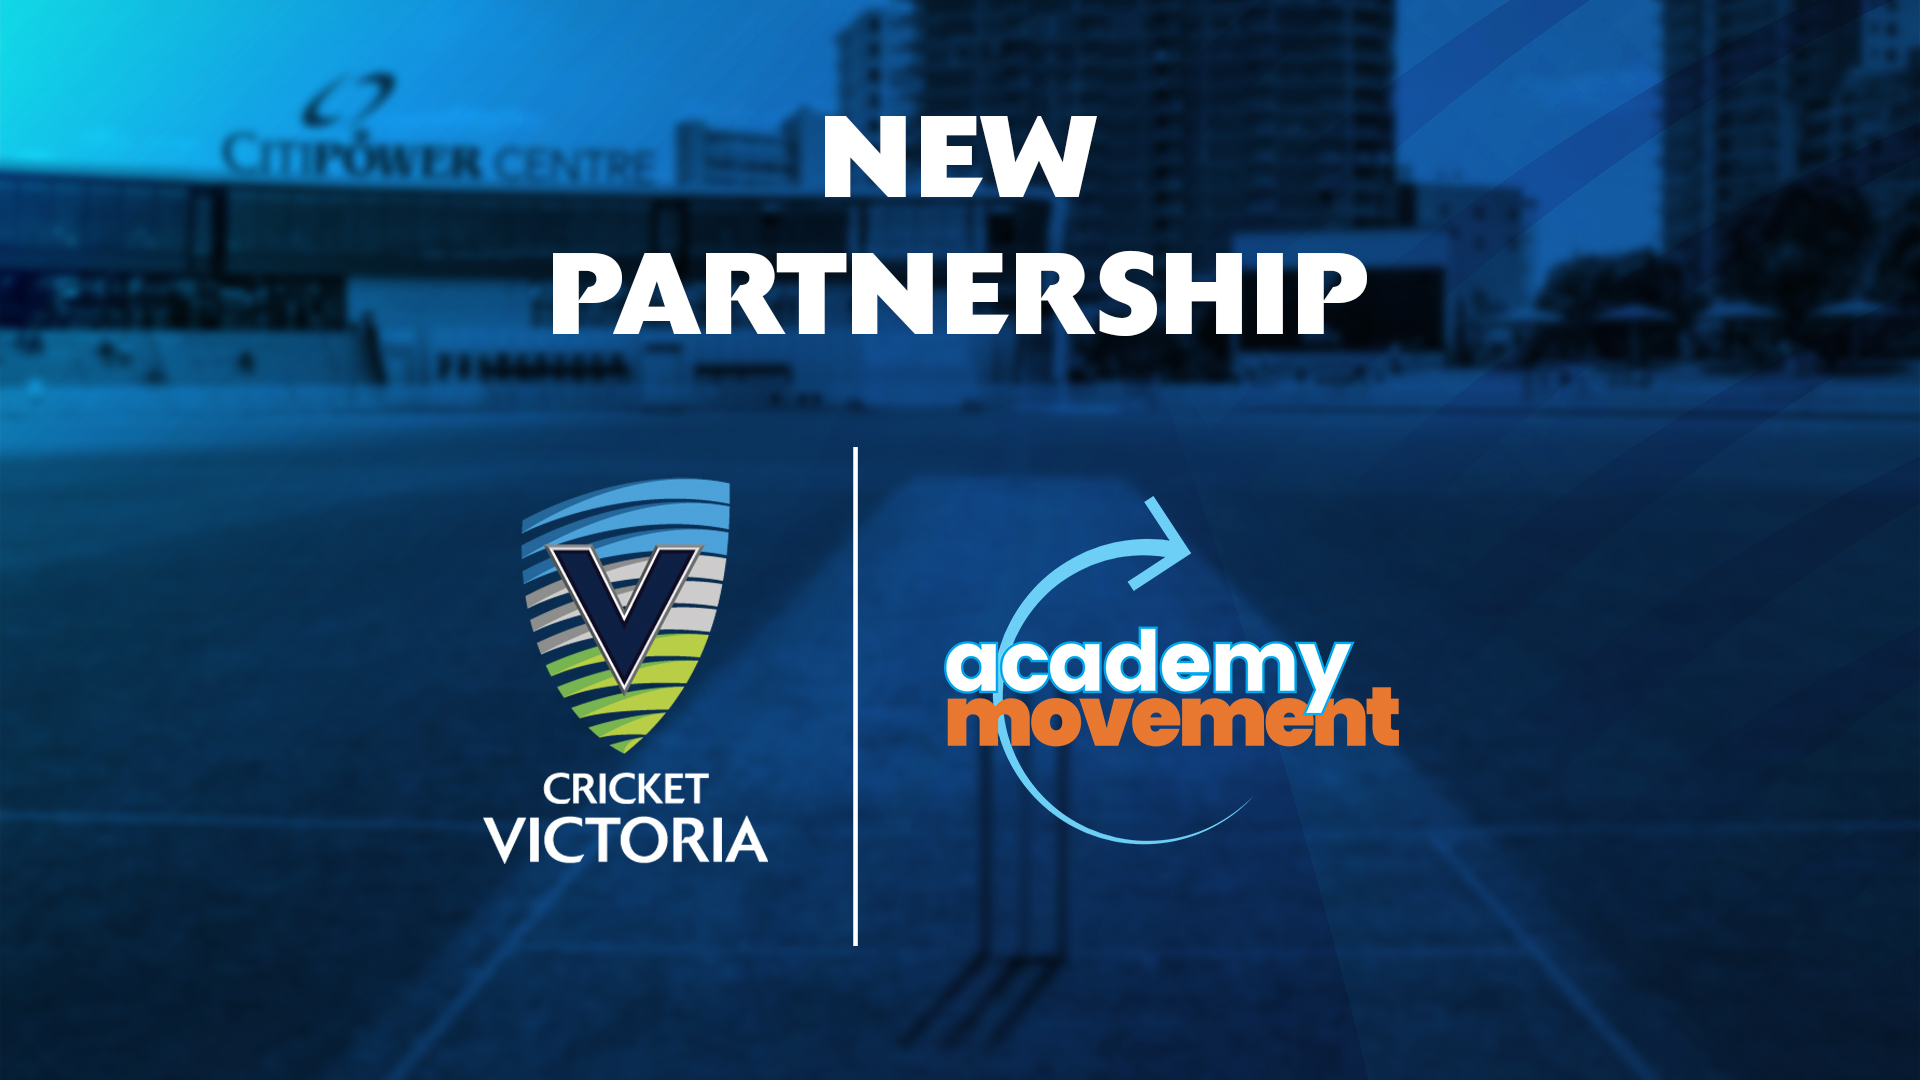 Cricket Victoria and Academy Movement bring cricket to the classroom